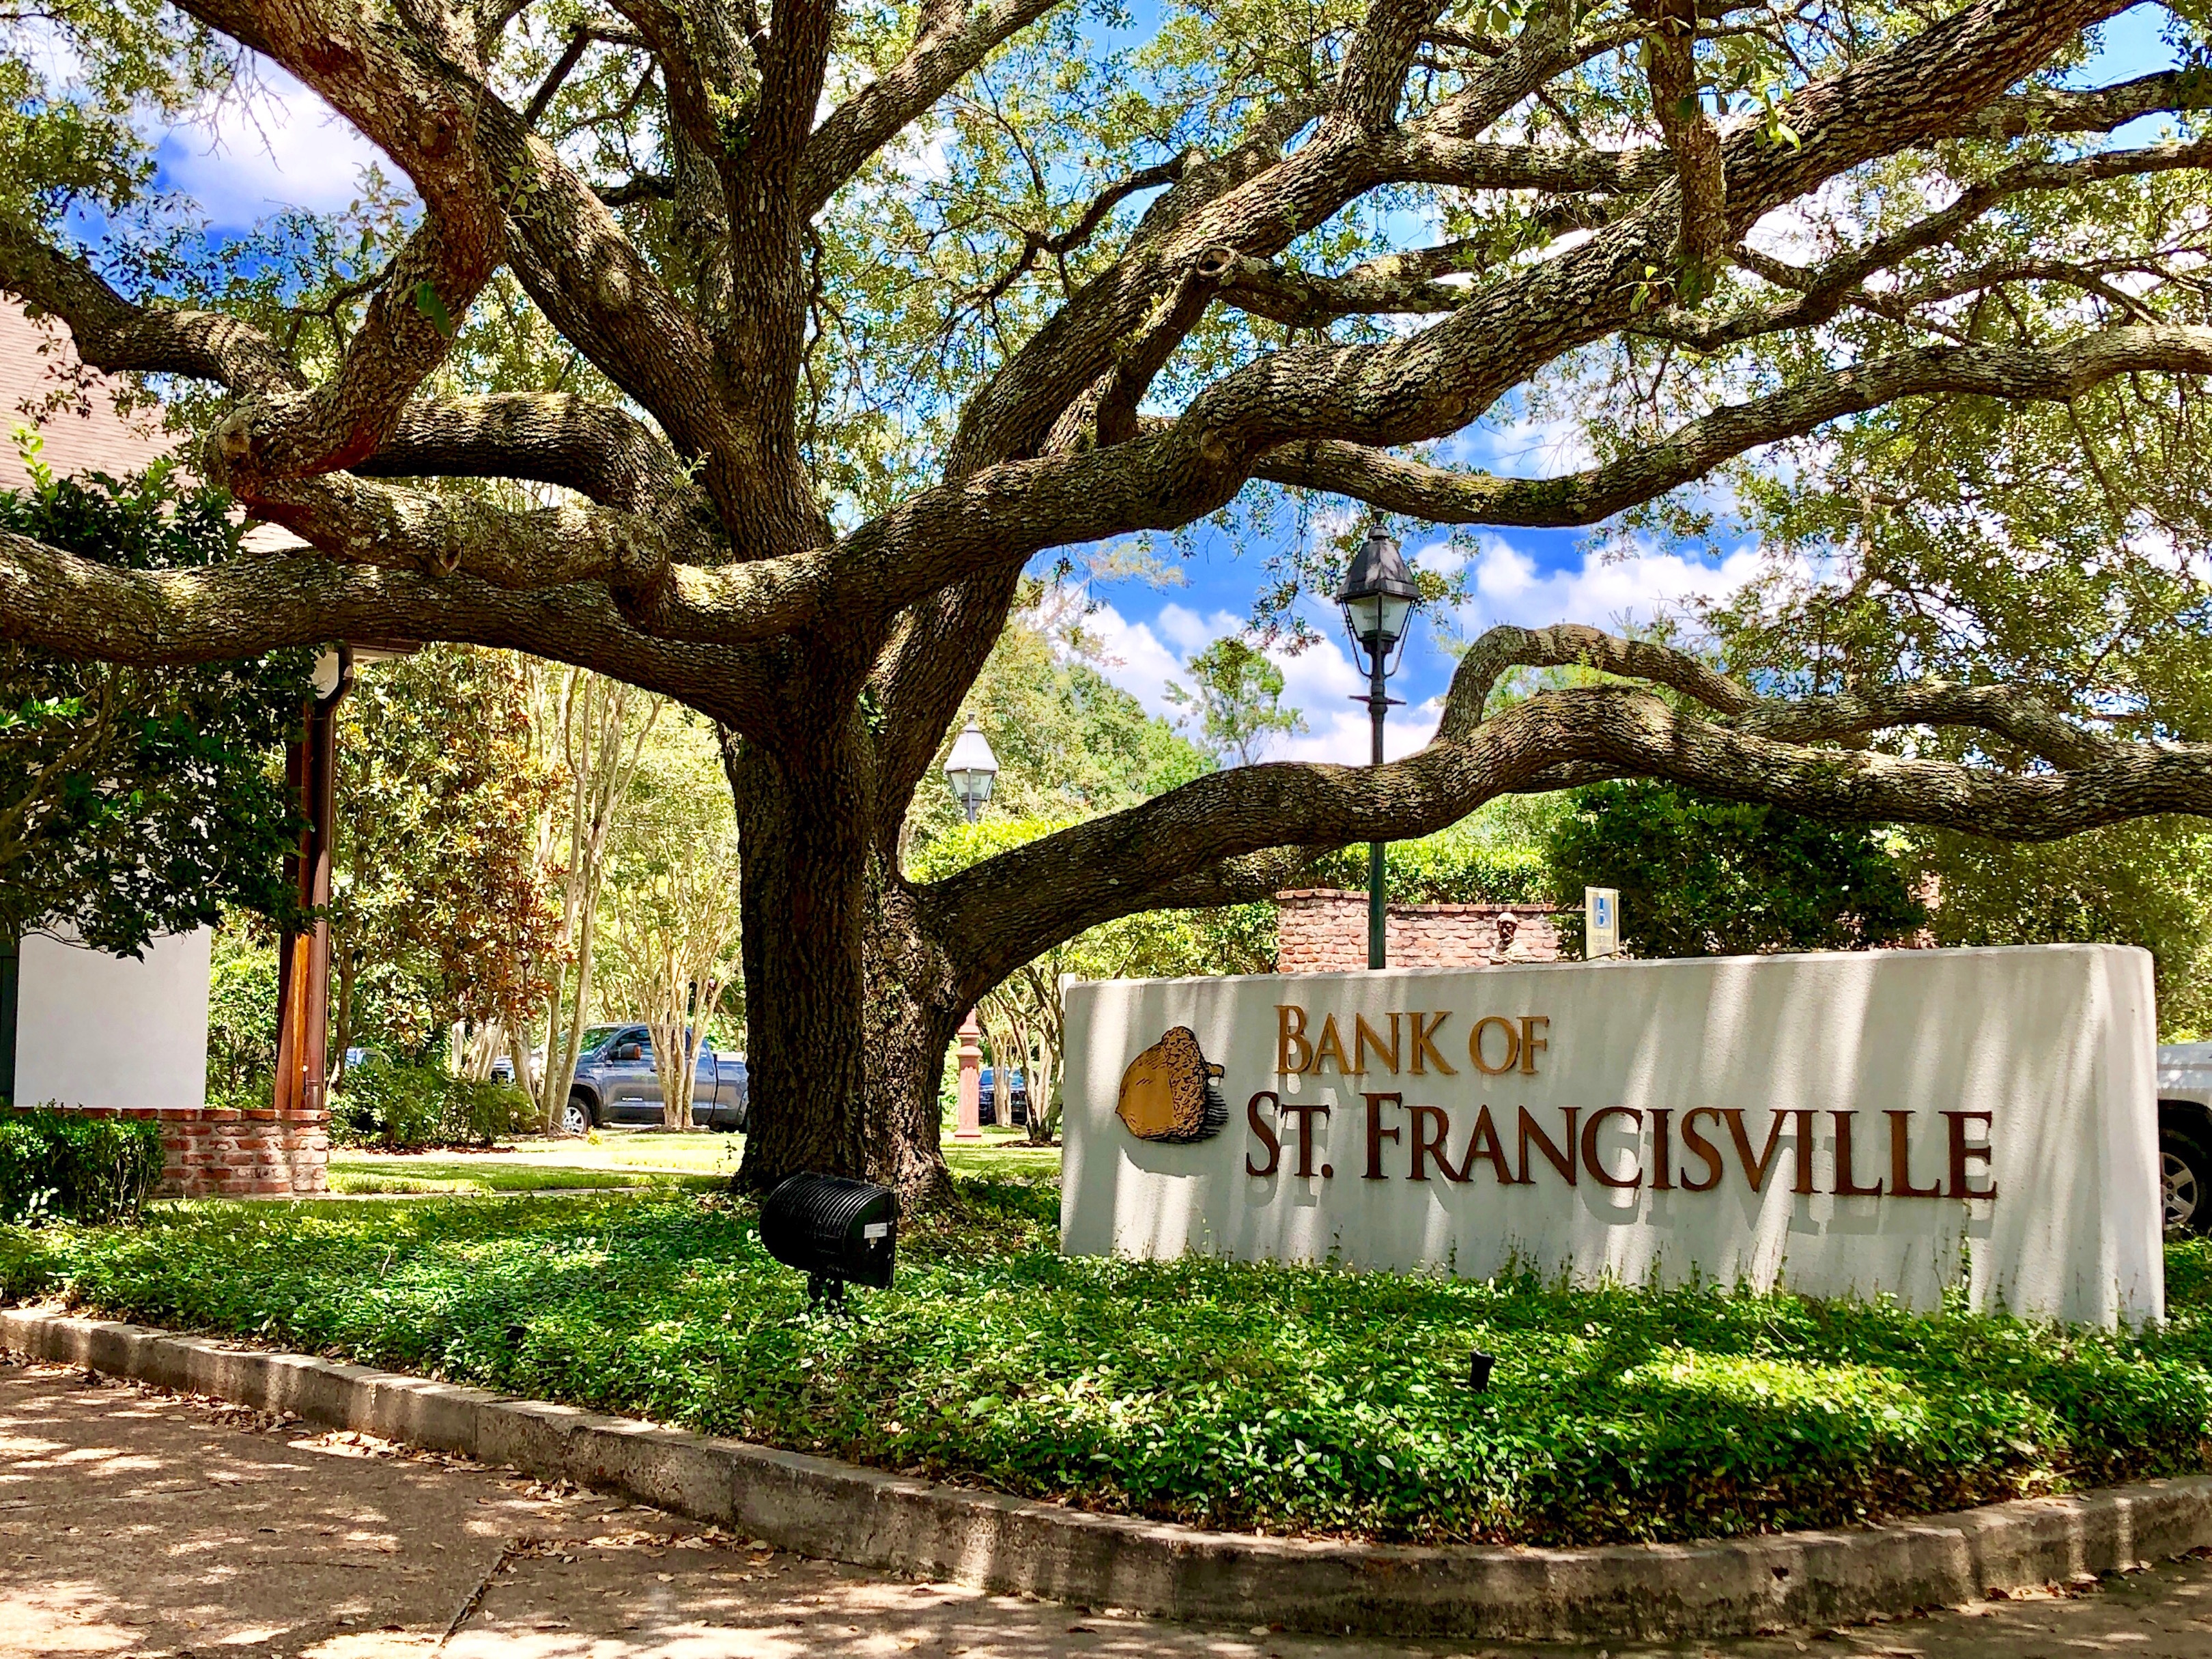 Bank of St Francisville